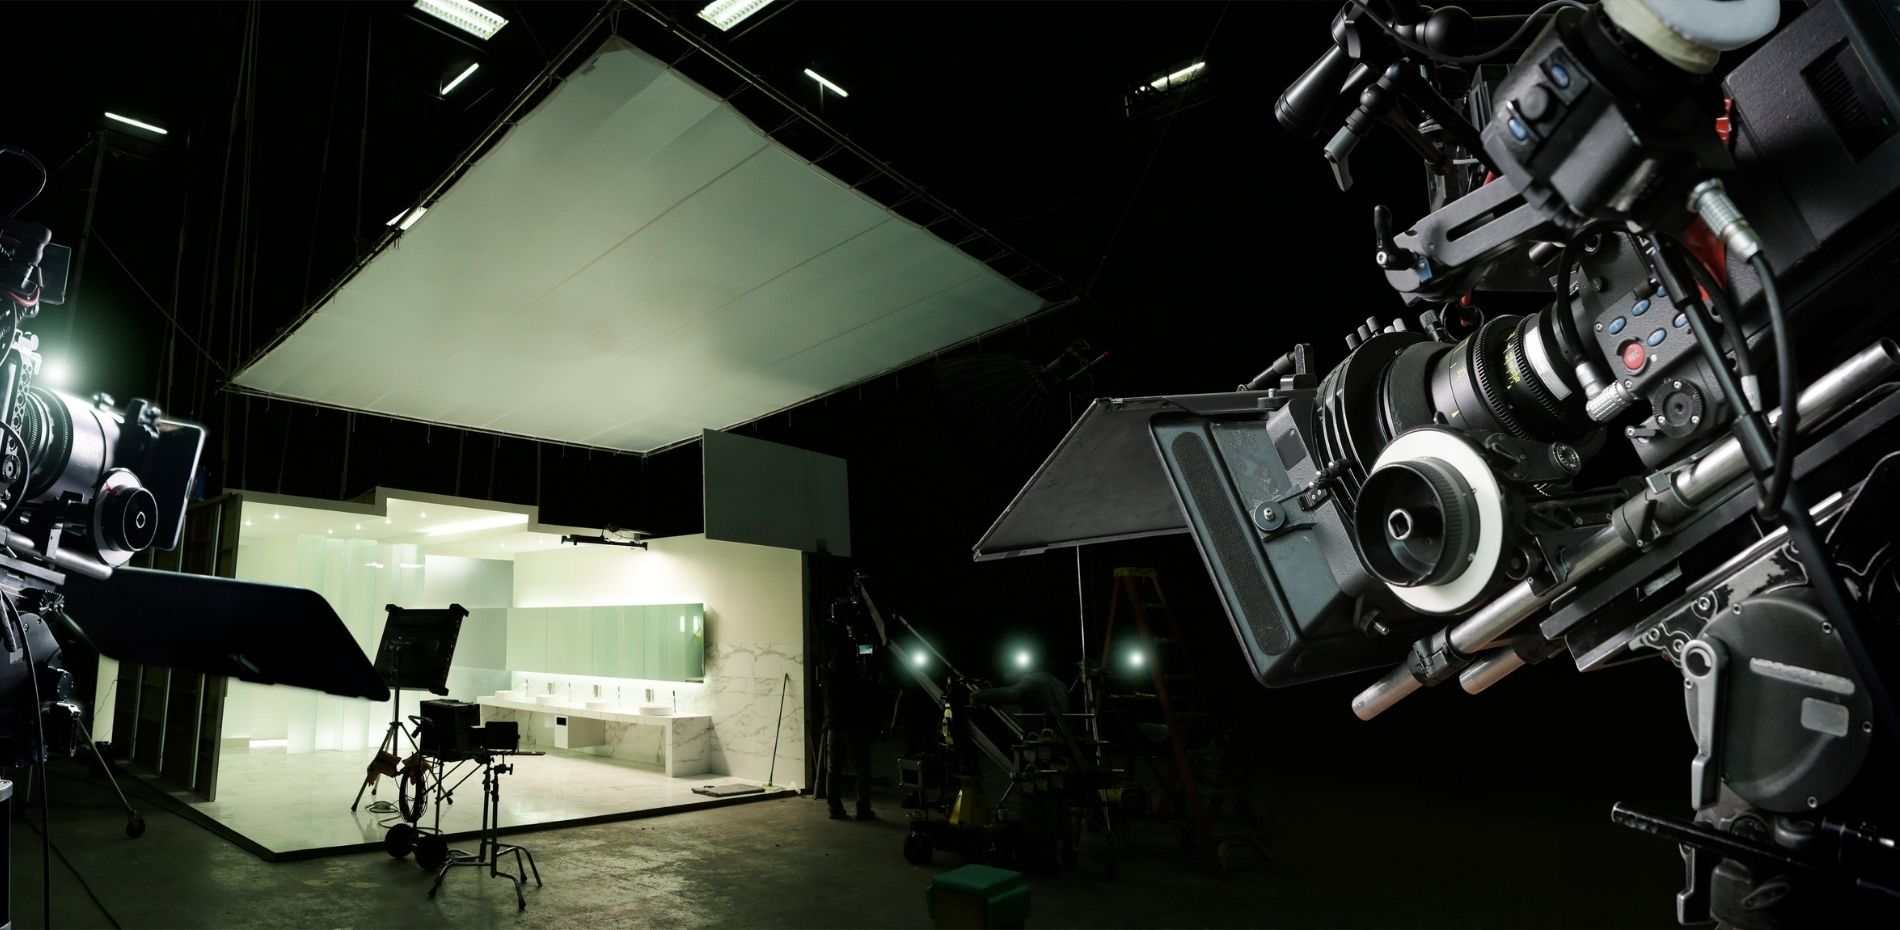 Behind the scenes of making of movie and TV commercial.